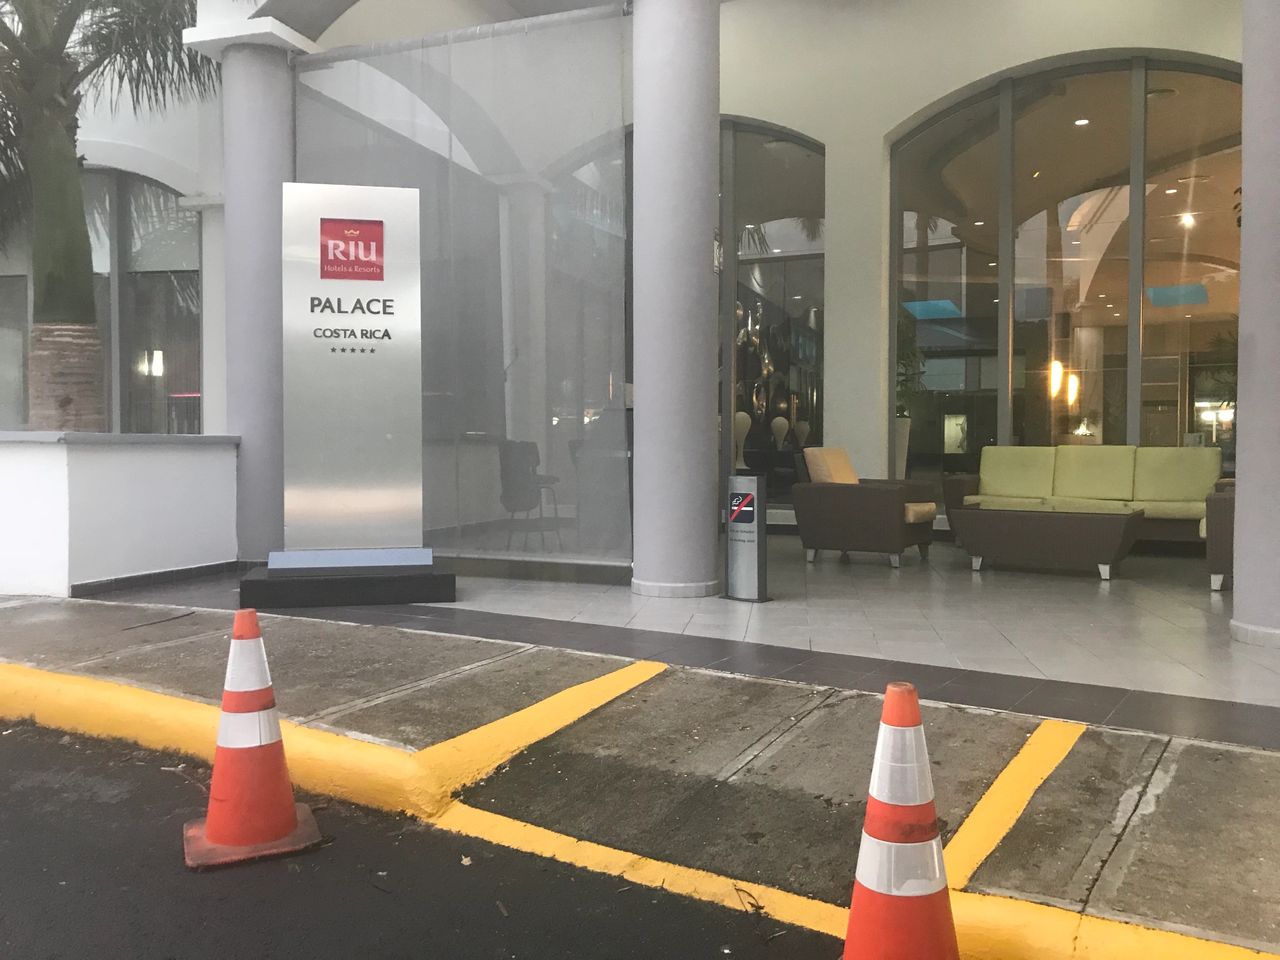 The ADA isn't law outside the USA, but most resorts like the Riu Palace in Costa Rica do a good job making sure you can navigate the property with your scooter.